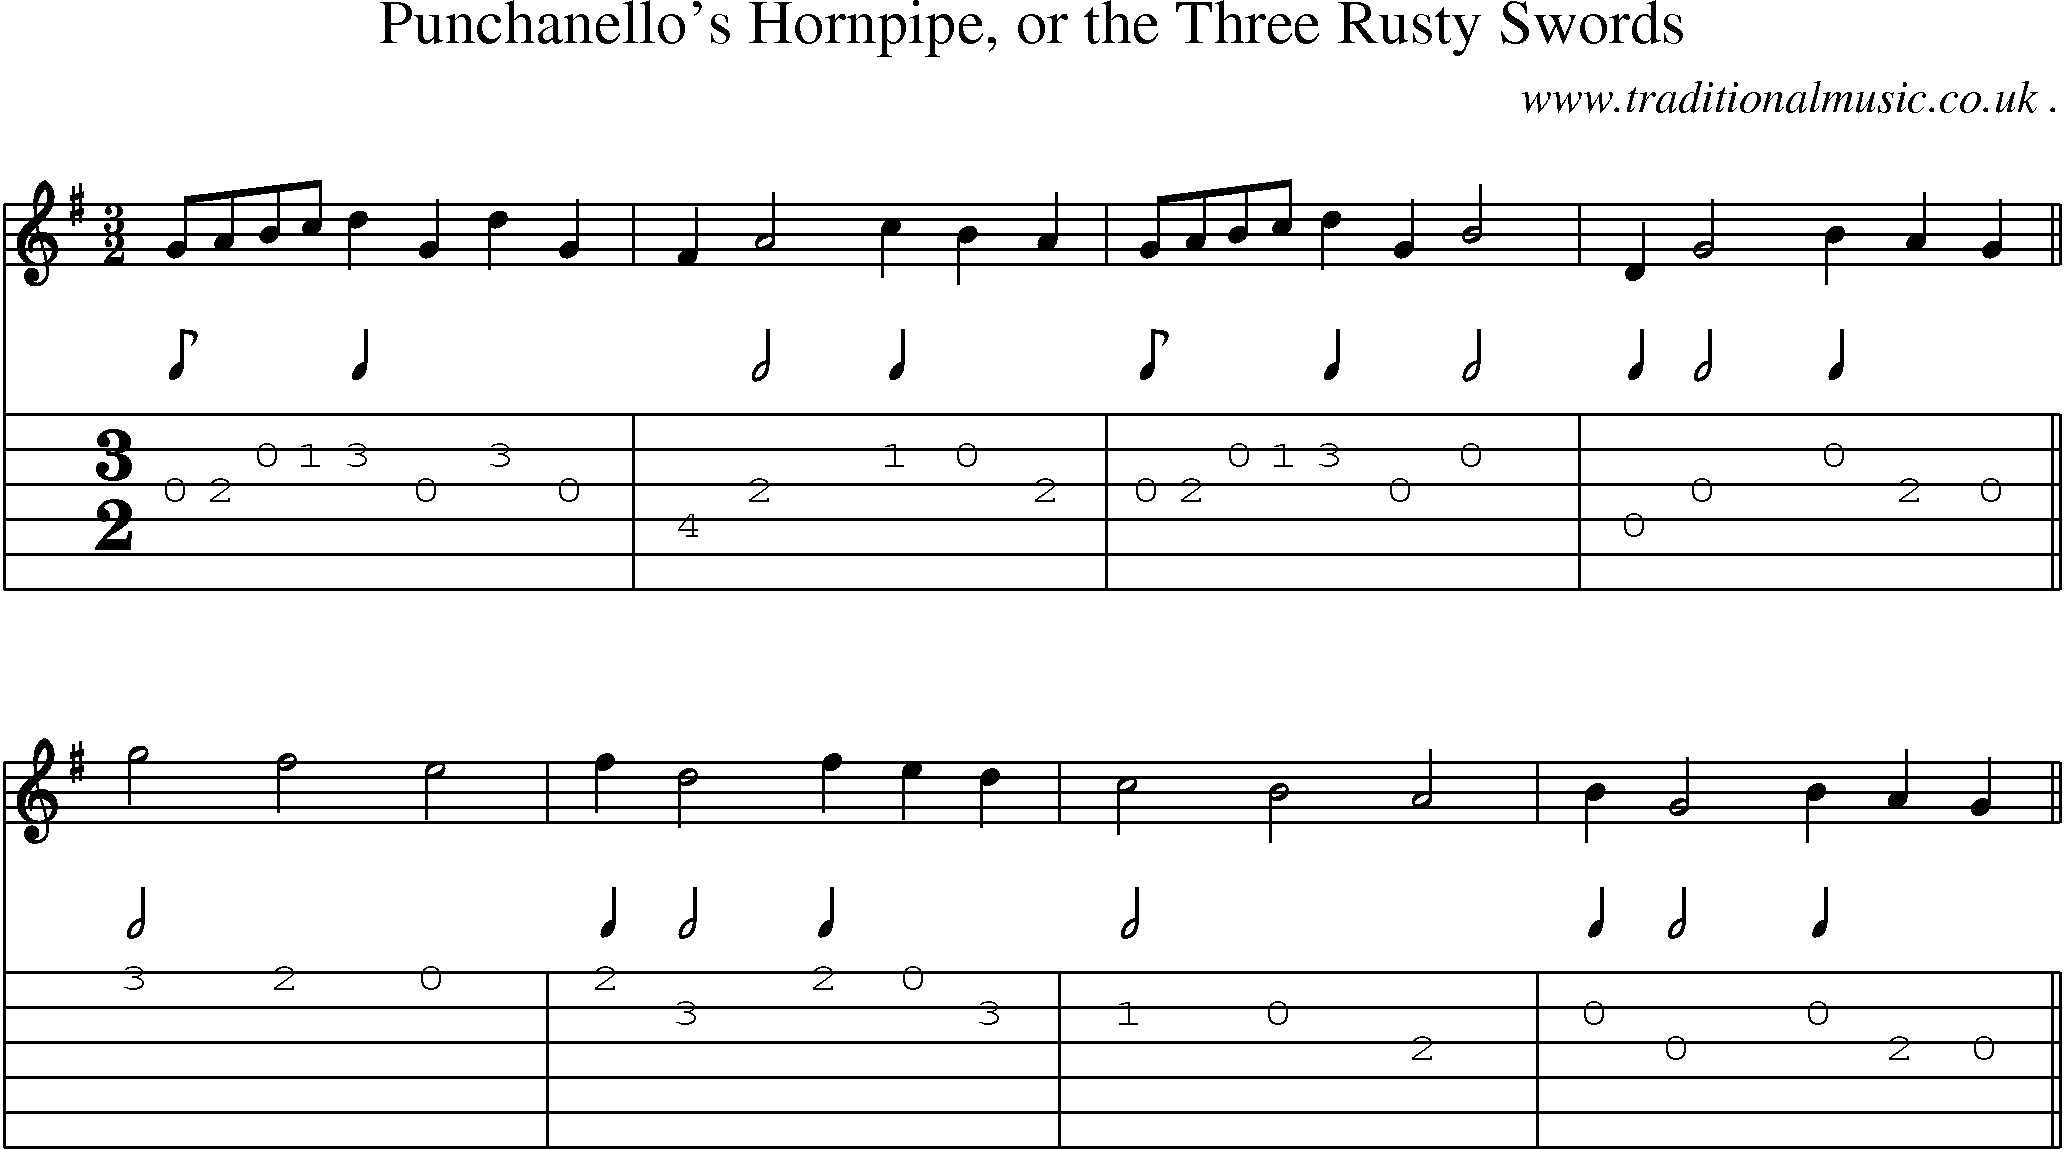 Sheet-Music and Guitar Tabs for Punchanellos Hornpipe Or The Three Rusty Swords